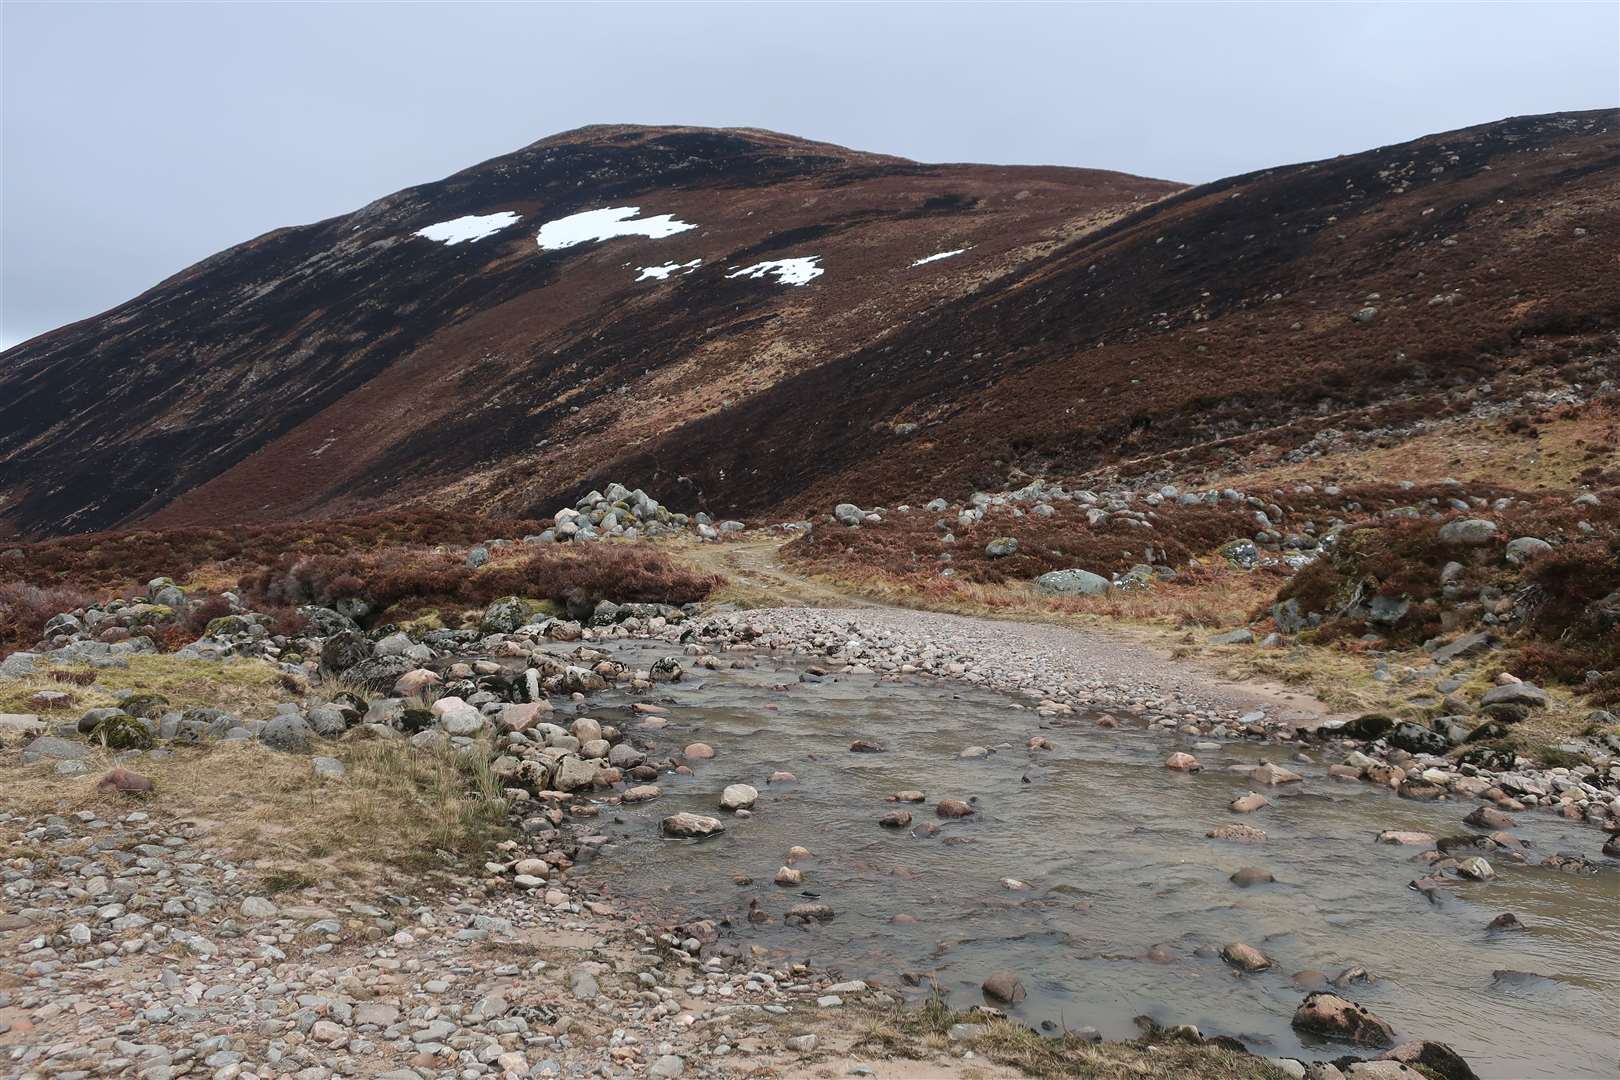 John heads up Beinn Bhuidhe in the Monadhliath in the first episode.